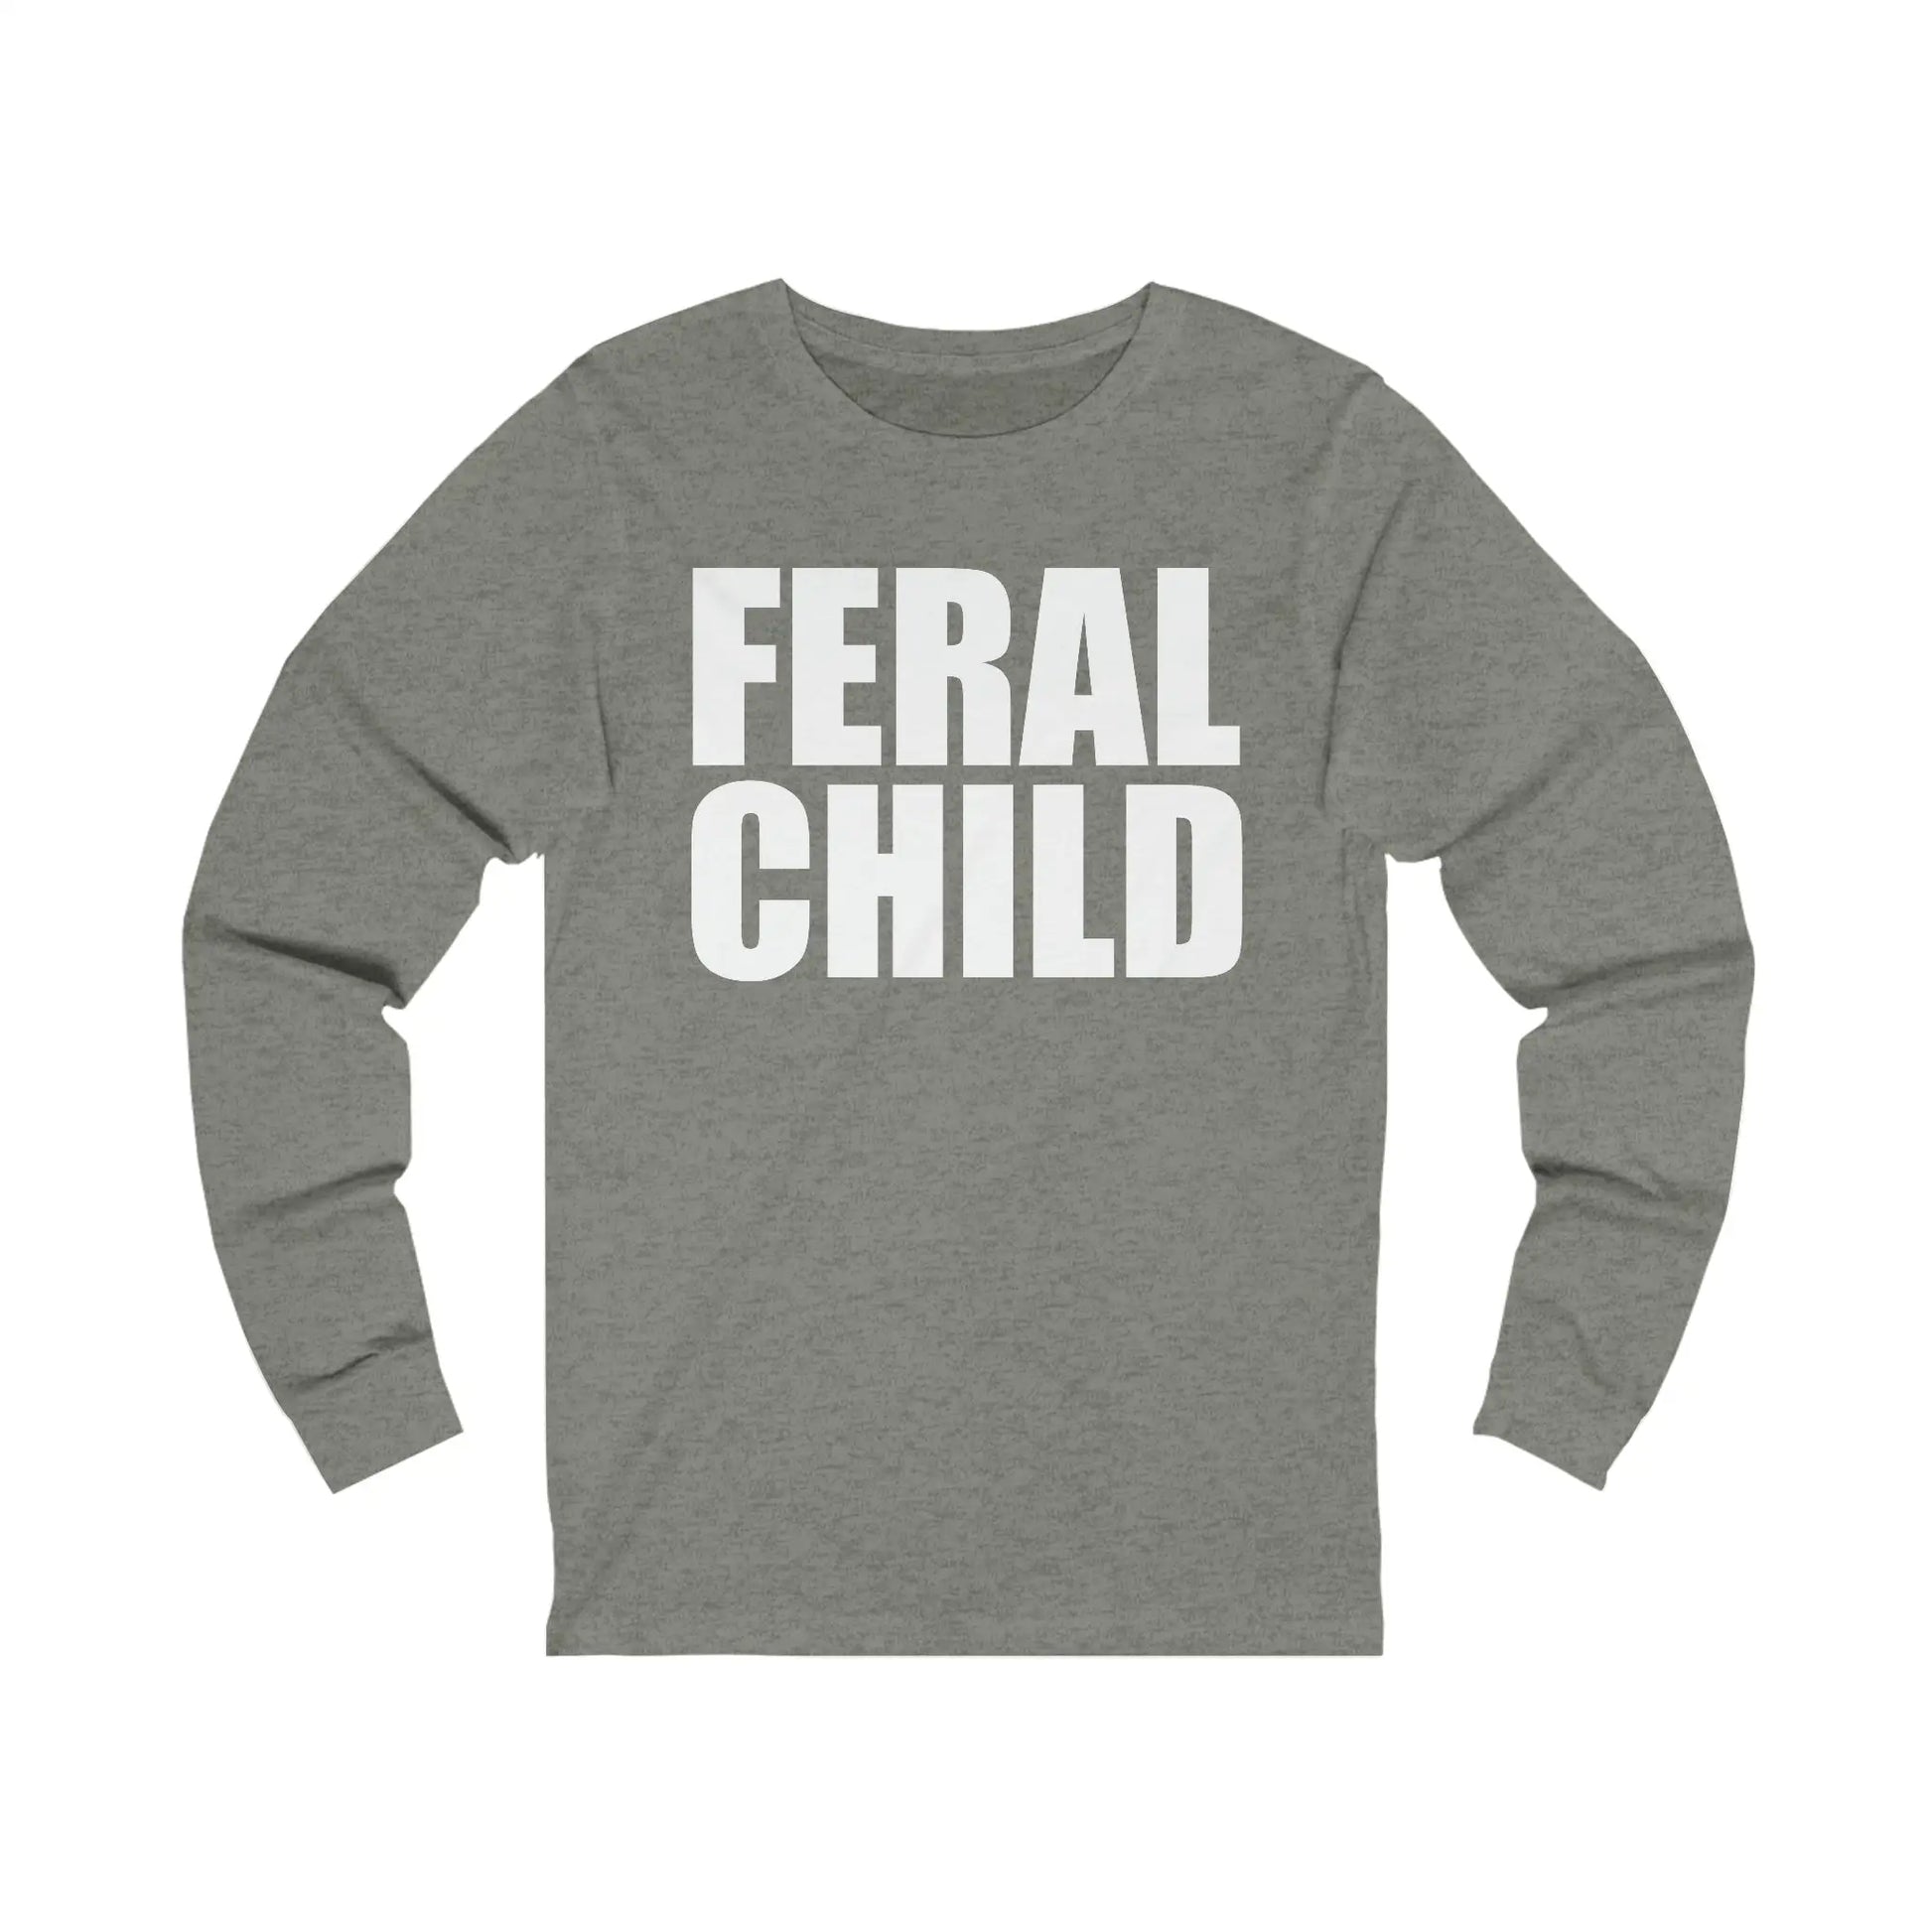 Feral Child Men's Jersey Long Sleeve Tee - Wicked Tees